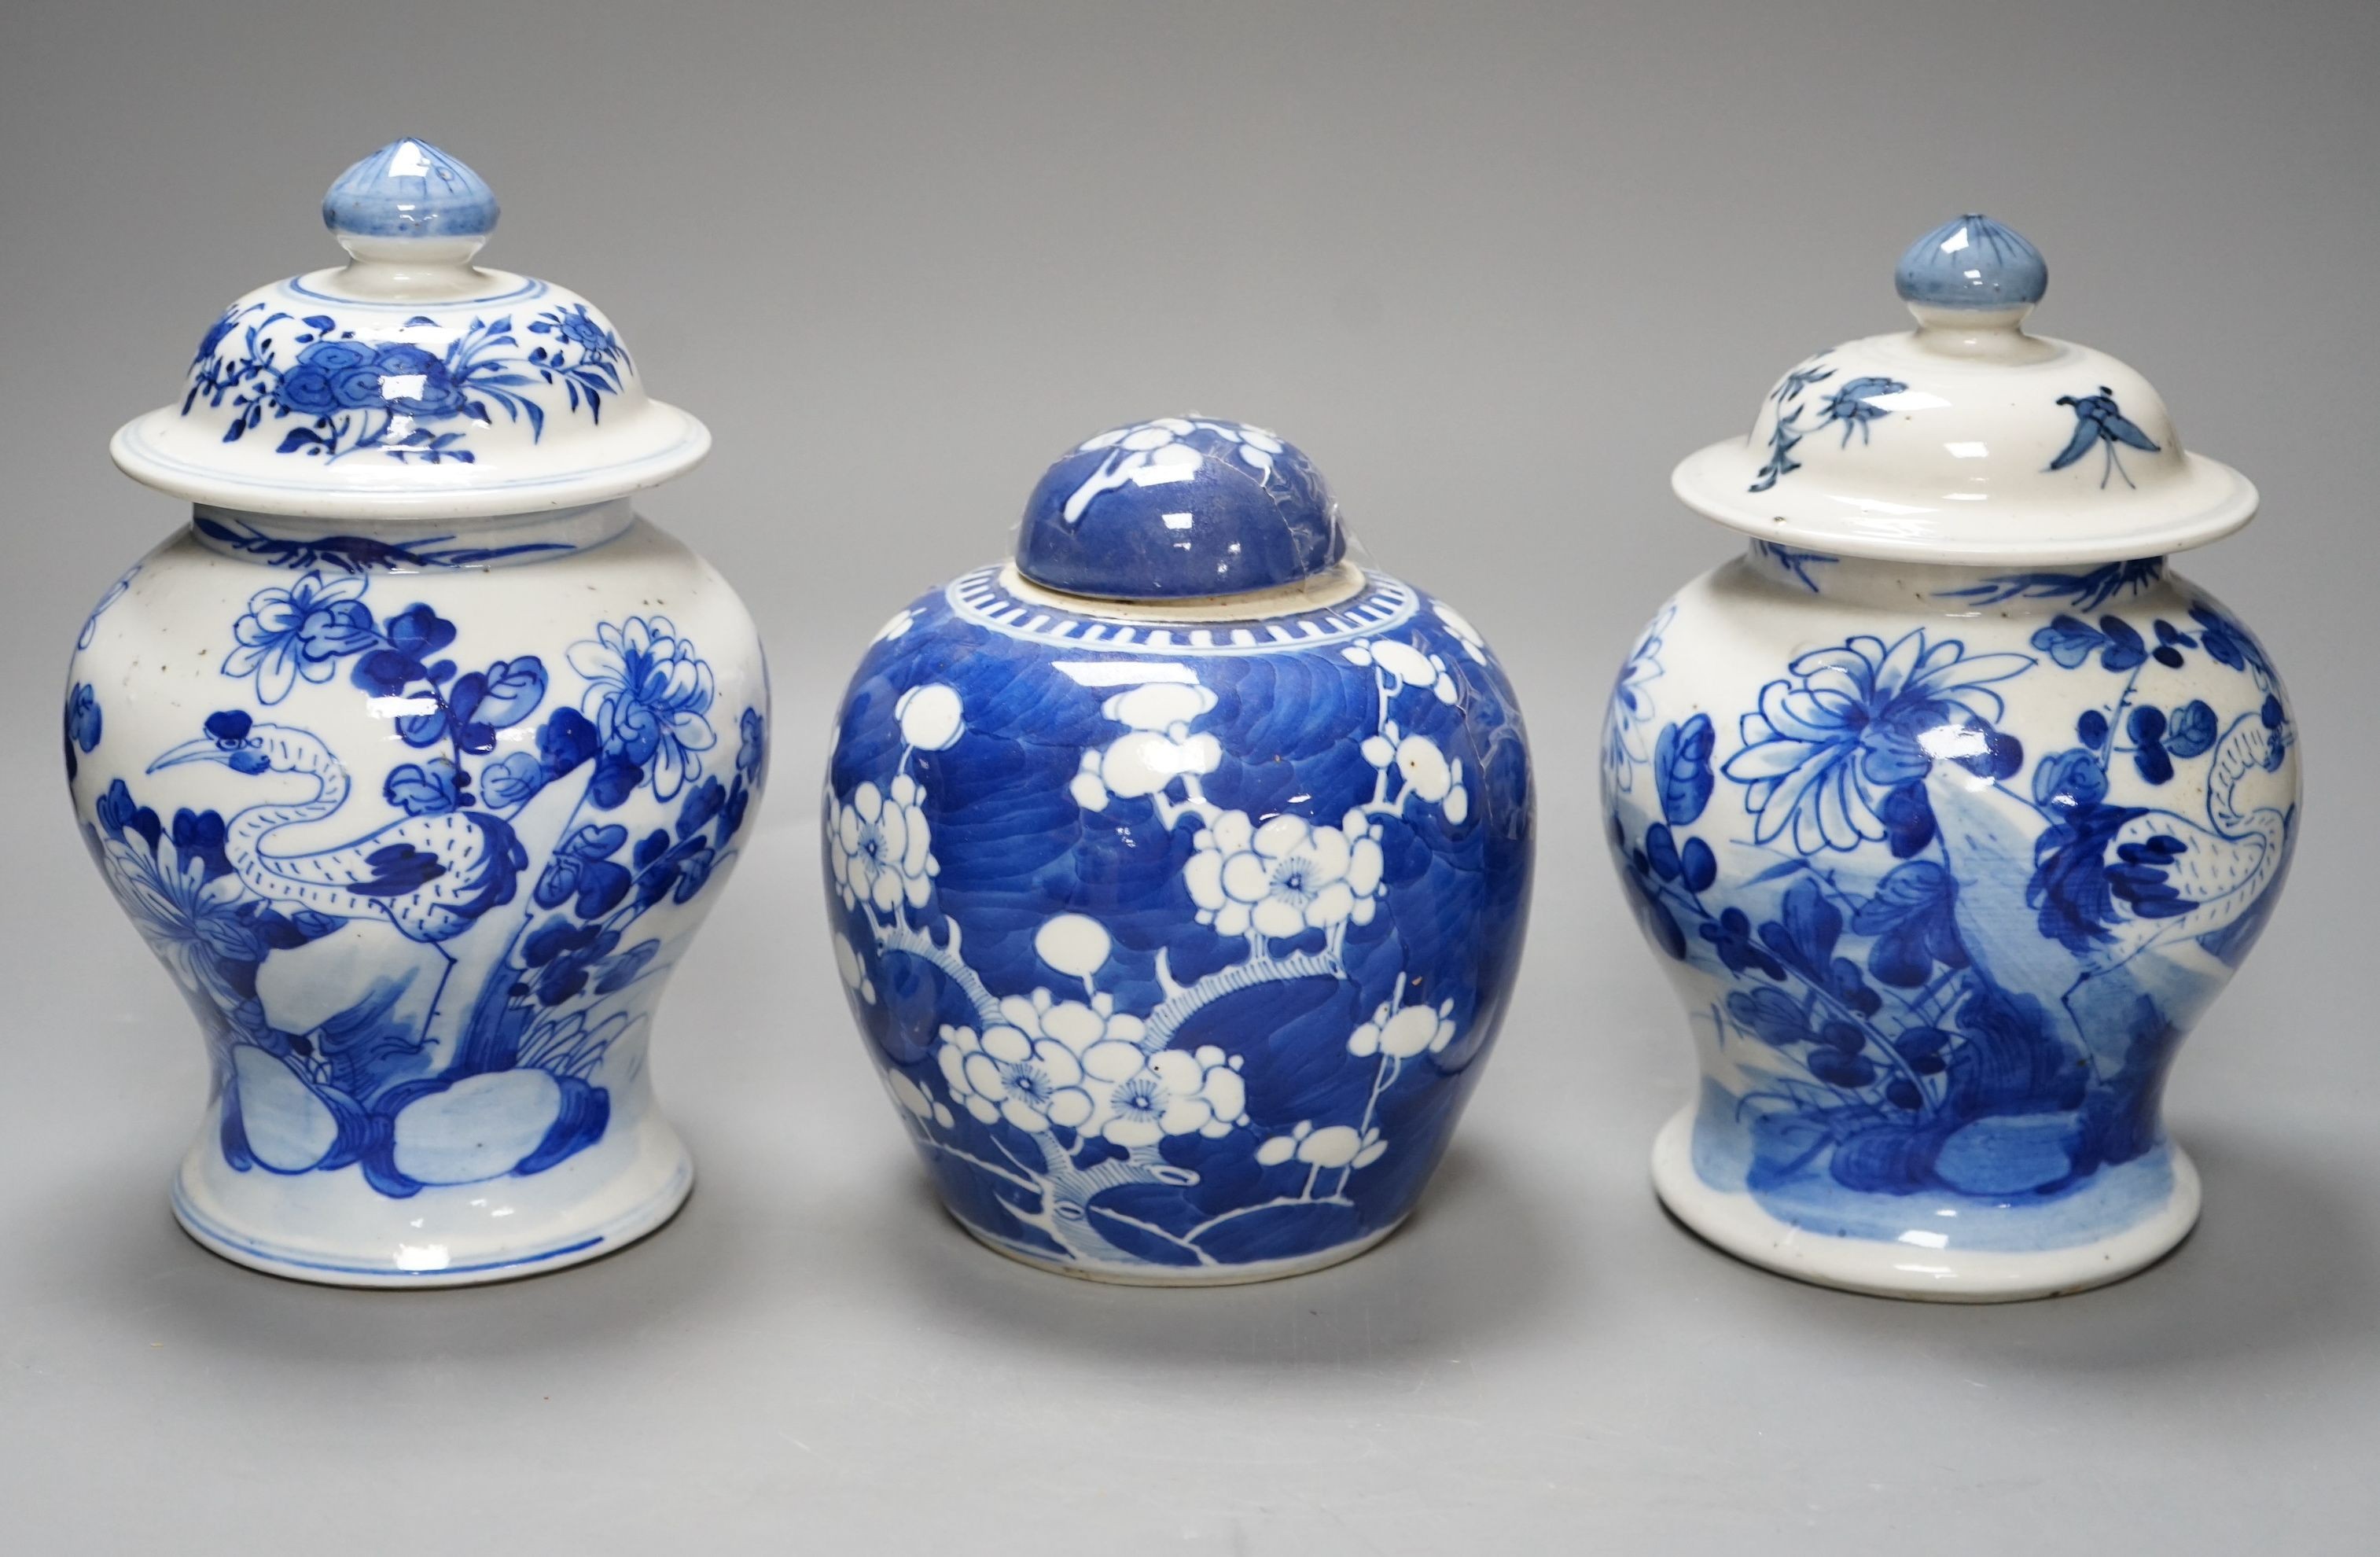 A pair of Chinese jars and covers and a prunus jar and cover circa 1900, jars and covers 21cms high